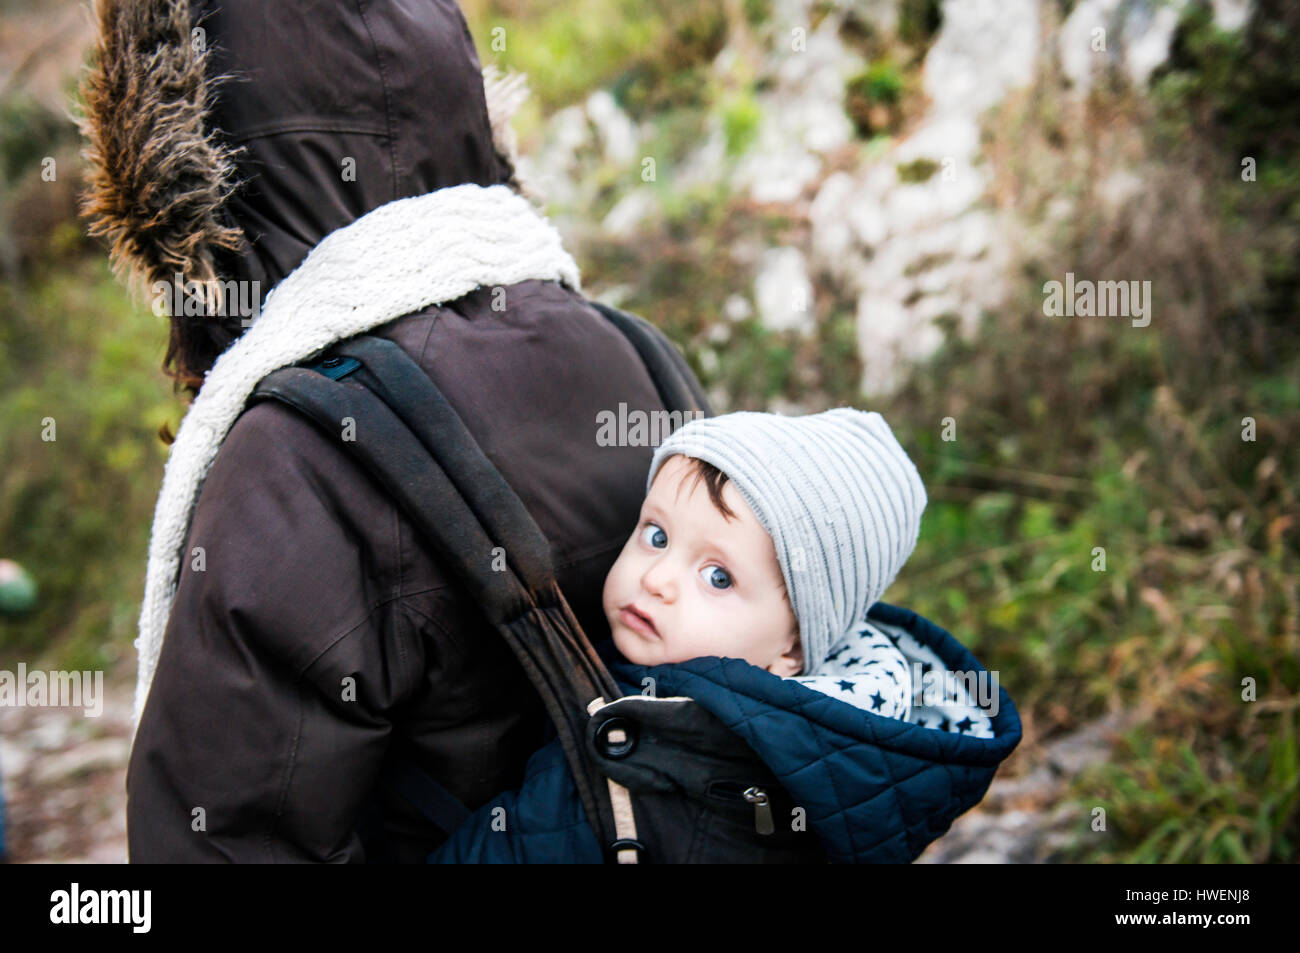 Portrait of baby boy wearing knit hat, carried in baby sling by mother Stock Photo